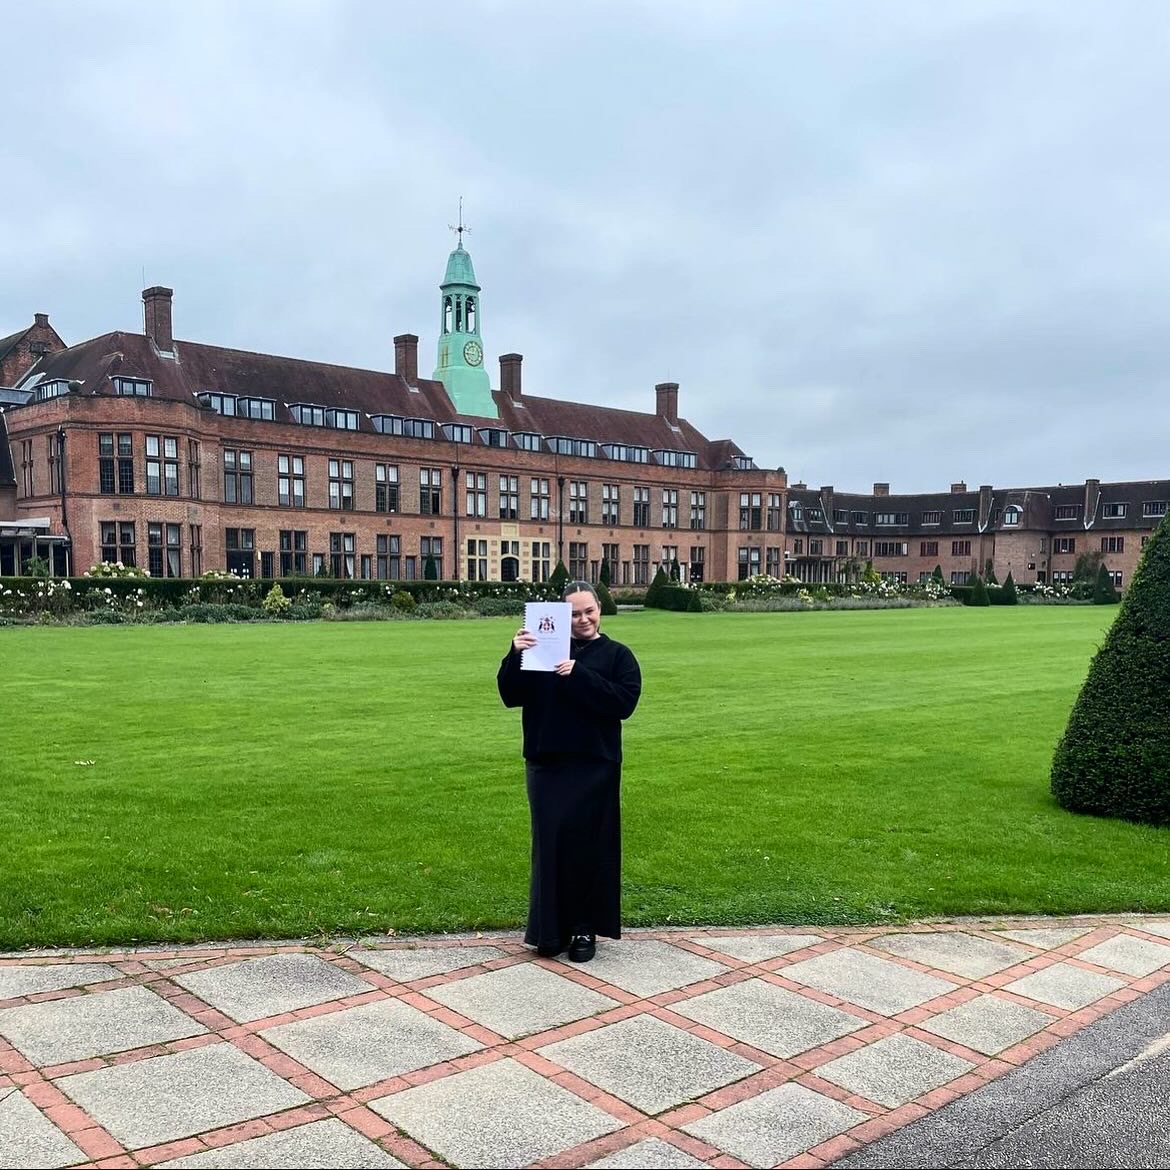 Happy ‘dissertation is done’ day! 🥳 We’ll be on campus today offering professional photos of the iconic dissertation photo 📸 📍 Fountain, 11:30 - 1:30 📍 Rectors Lawn, 2:30 - 3:30